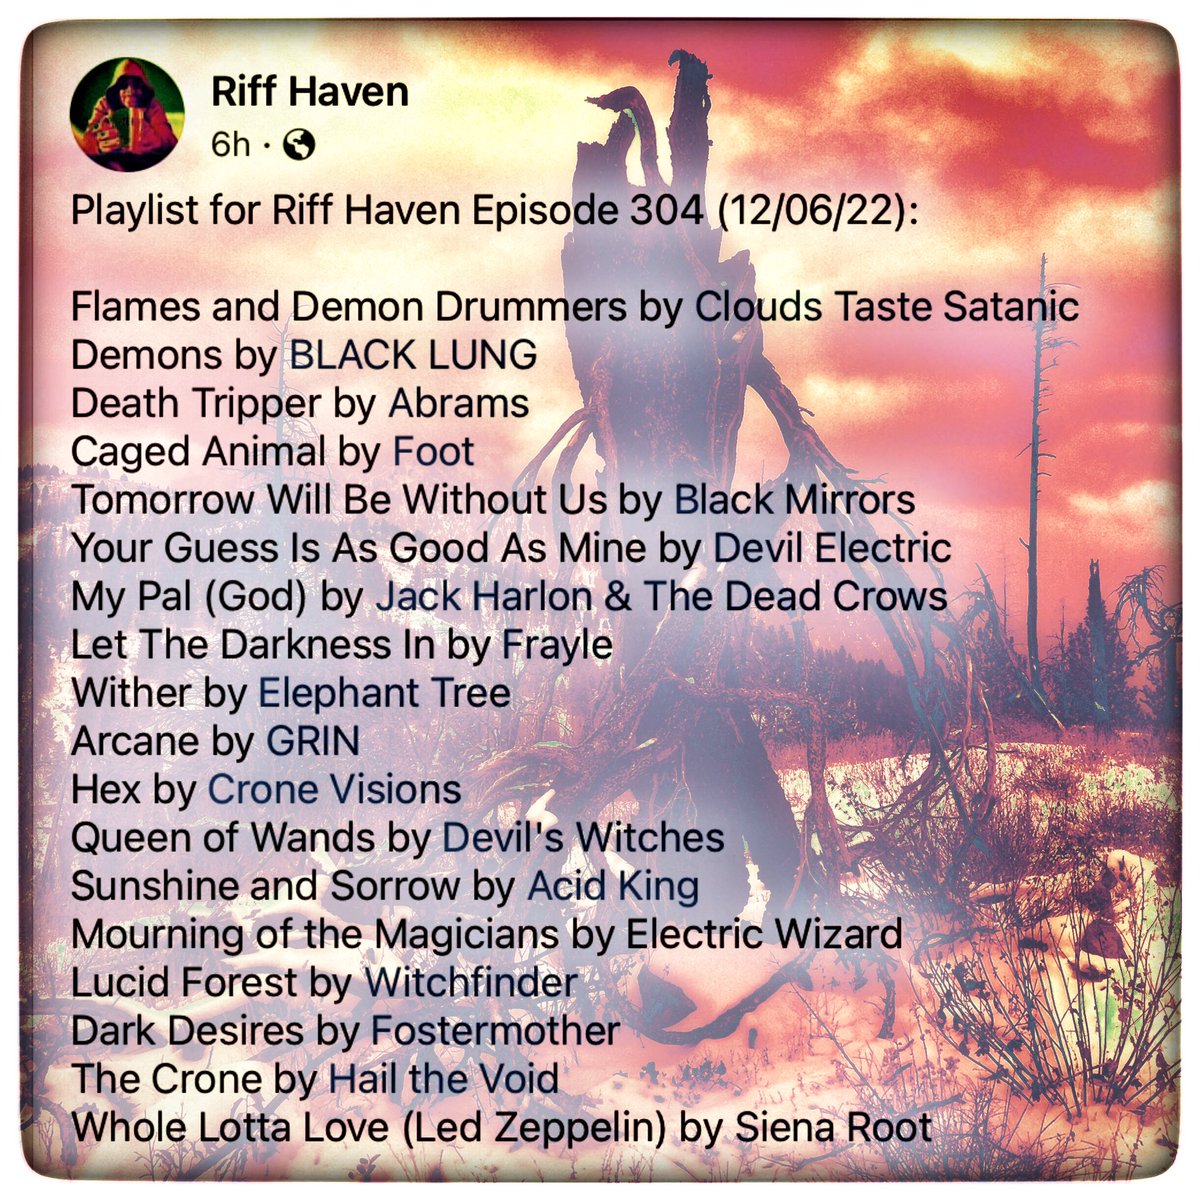 #RiffHaven #RadioBoise #CloudsTasteSatanic #BlackLung #Abrams #Foot #BlackMirrors #DevilElectric #JackHarlonandtheDeadCrows #Frayle #ElephantTree #Grin #CroneVisions #DevilsWitches #AcidKing #ElectricWizard #Witchfinder #Fostermother #HailtheVoid #SiennaRoot